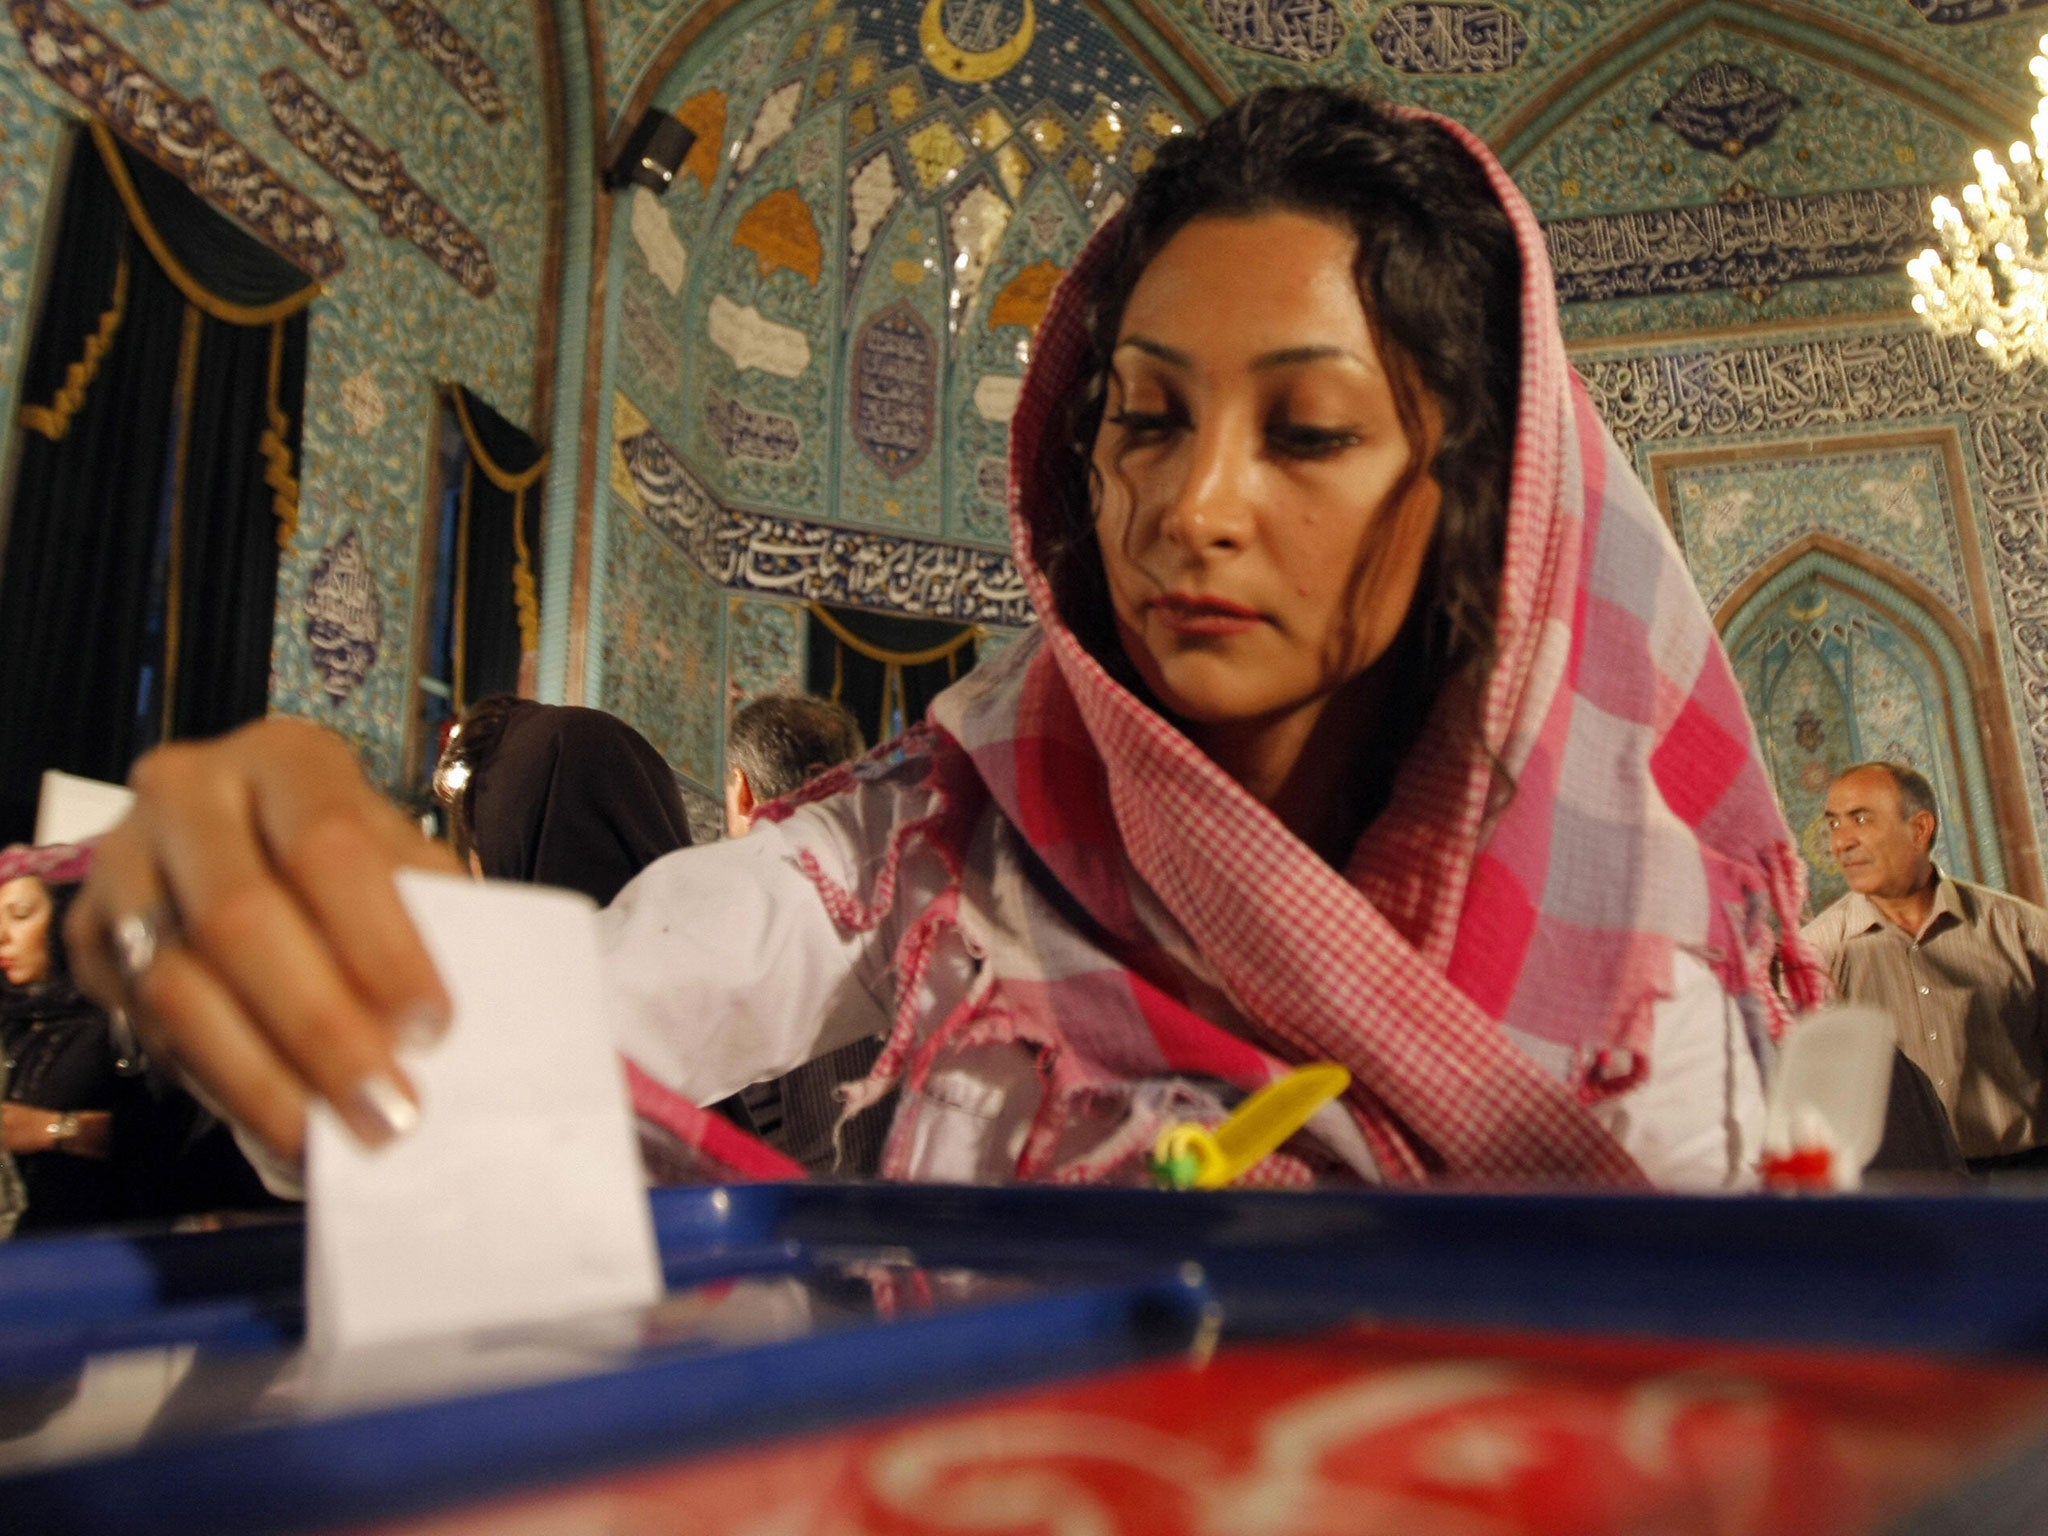 Women won 14 of the 290 seats in the Iranian Parliament